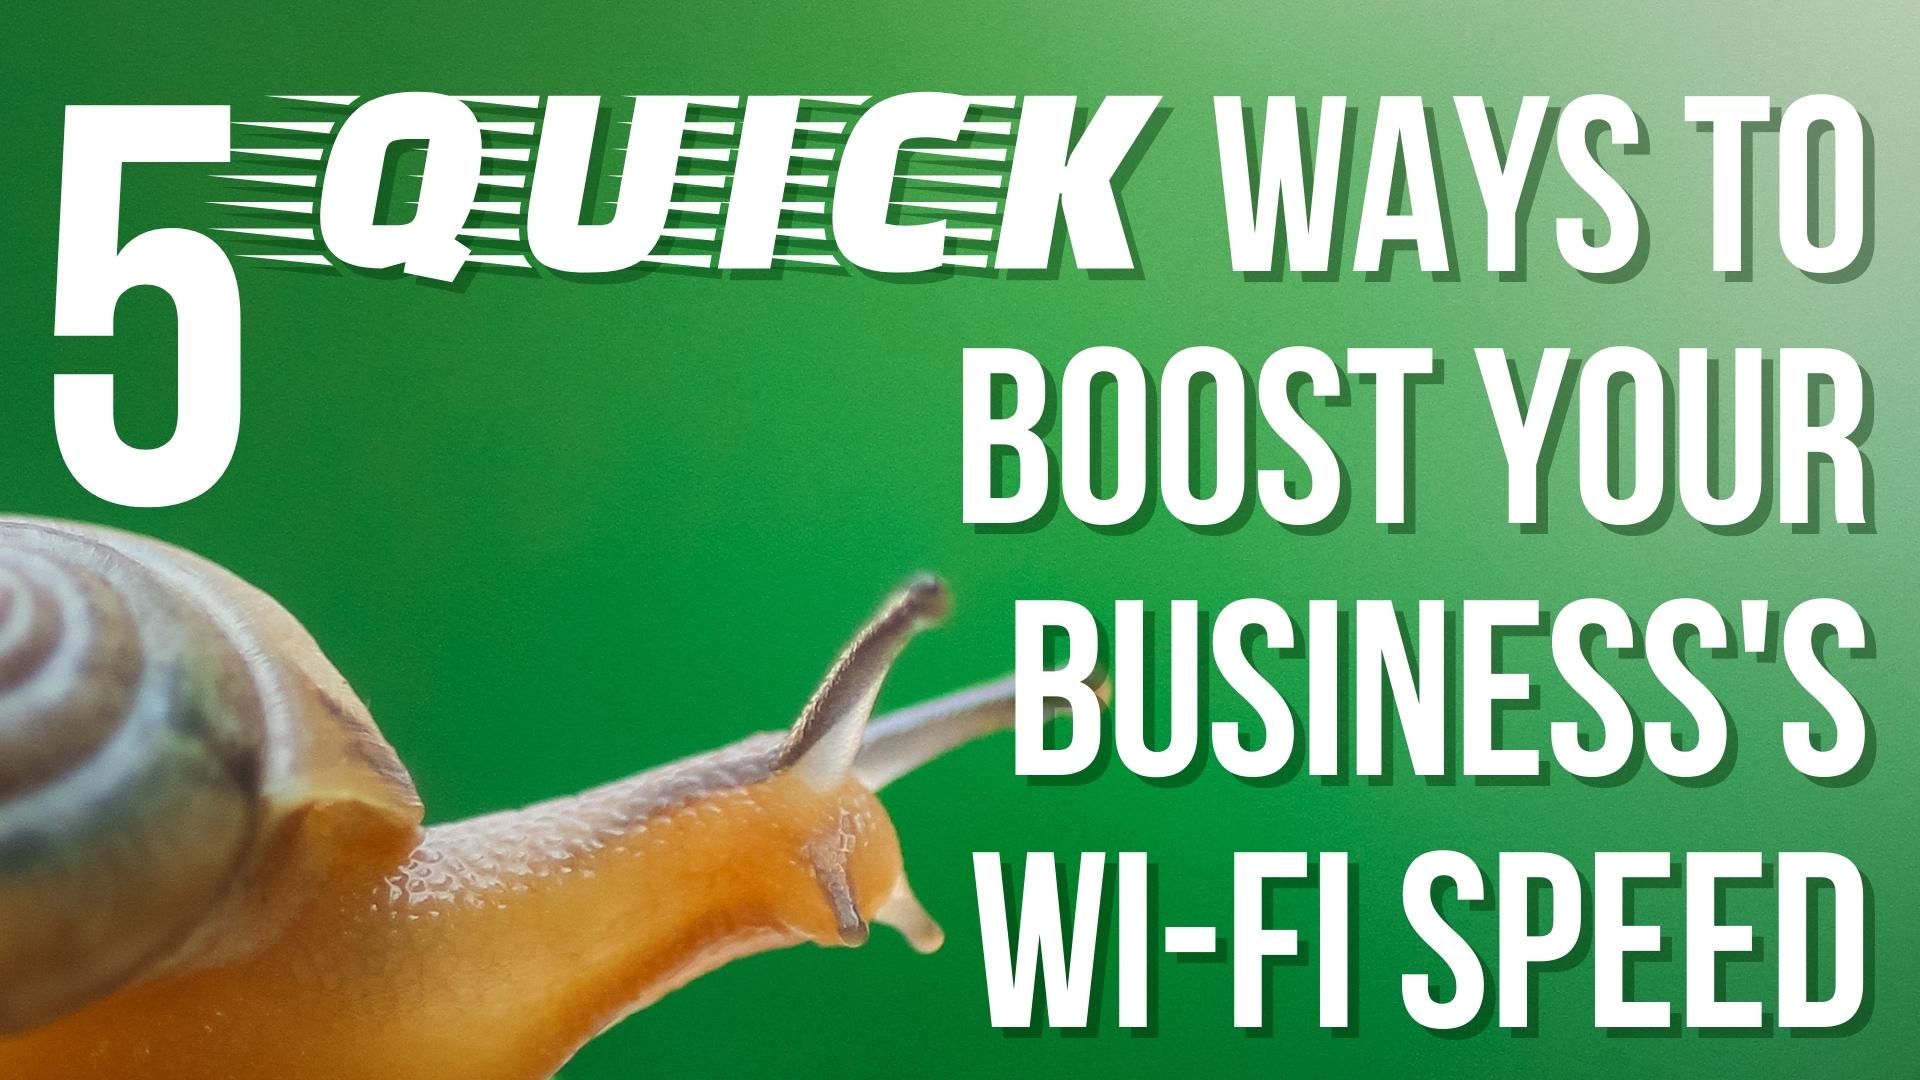 5 quick ways to boost your business’s Wi-Fi speed